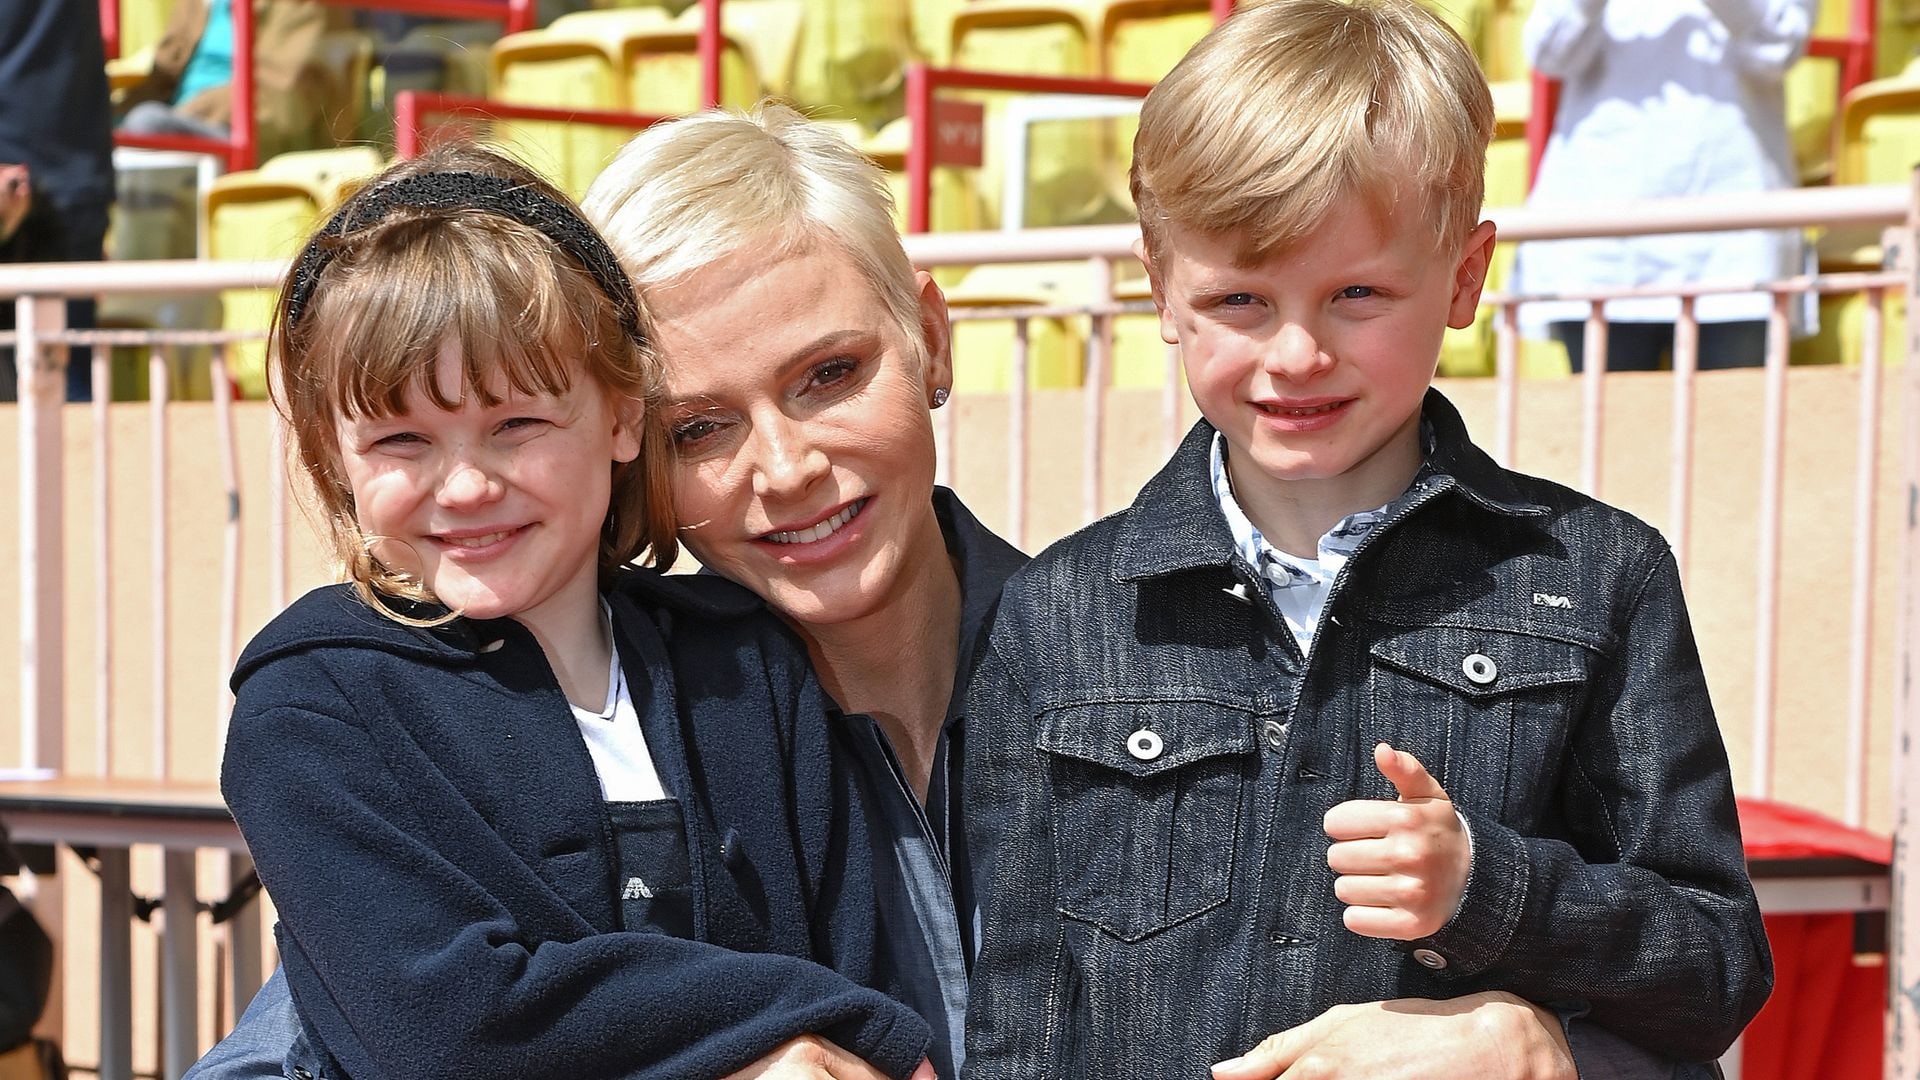 Princess Charlene's most heartwarming moments with her children Prince Jacques and Princess Gabriella